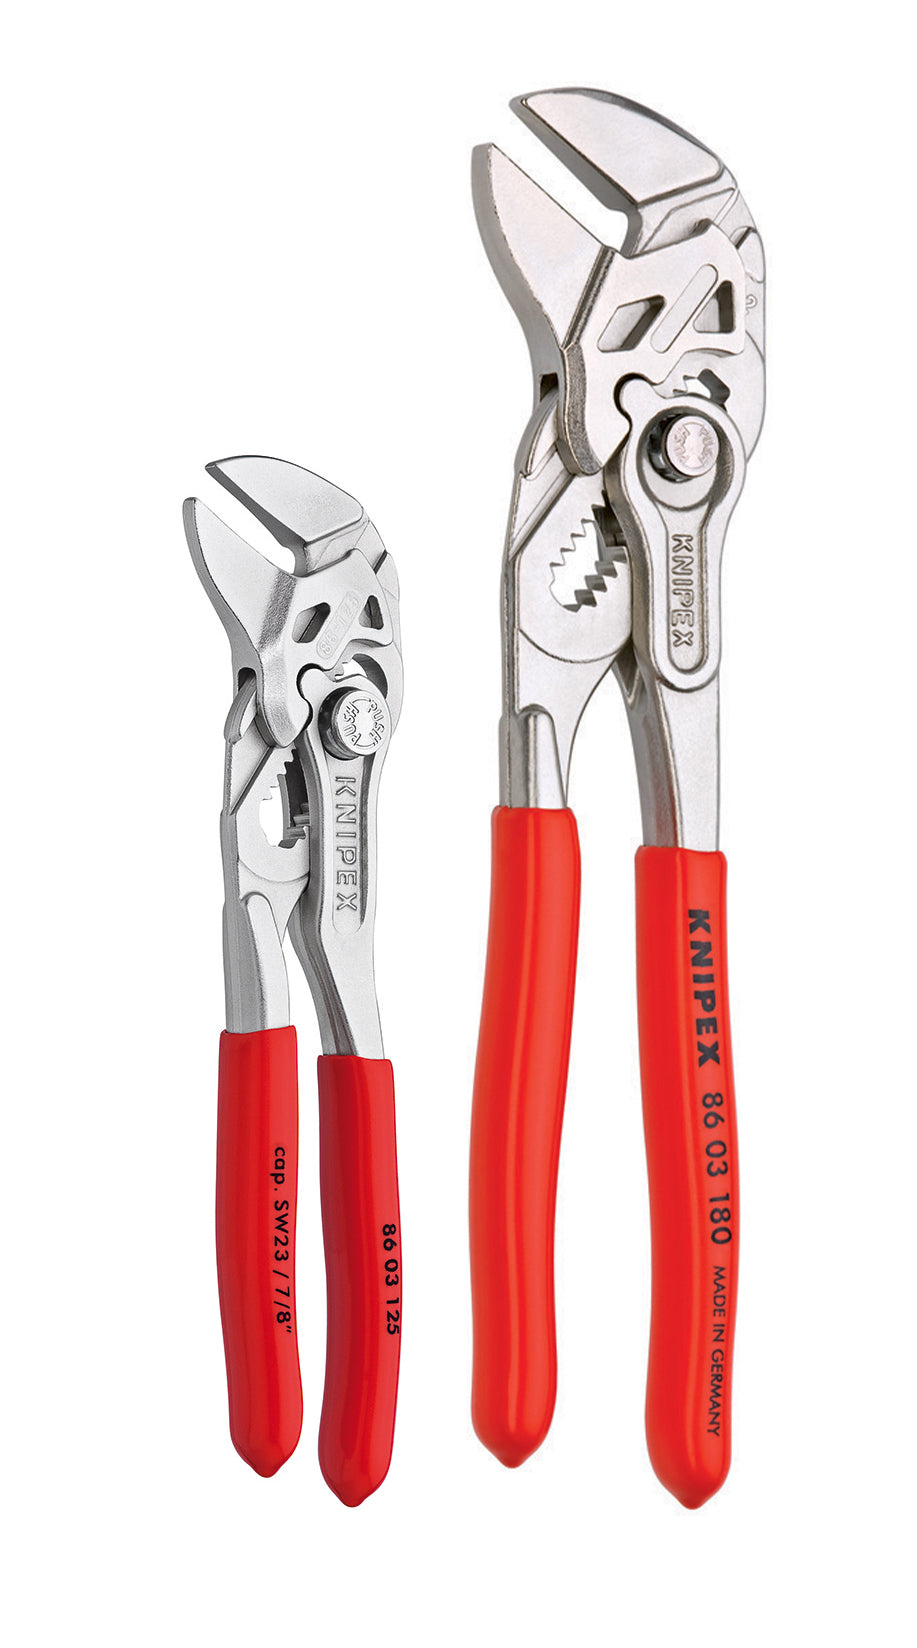 KNIPEX Tools - 2 Piece Compact Pliers Wrench Set - Mini Grip, Hold & Bend Tool Kit – 9K0080121US